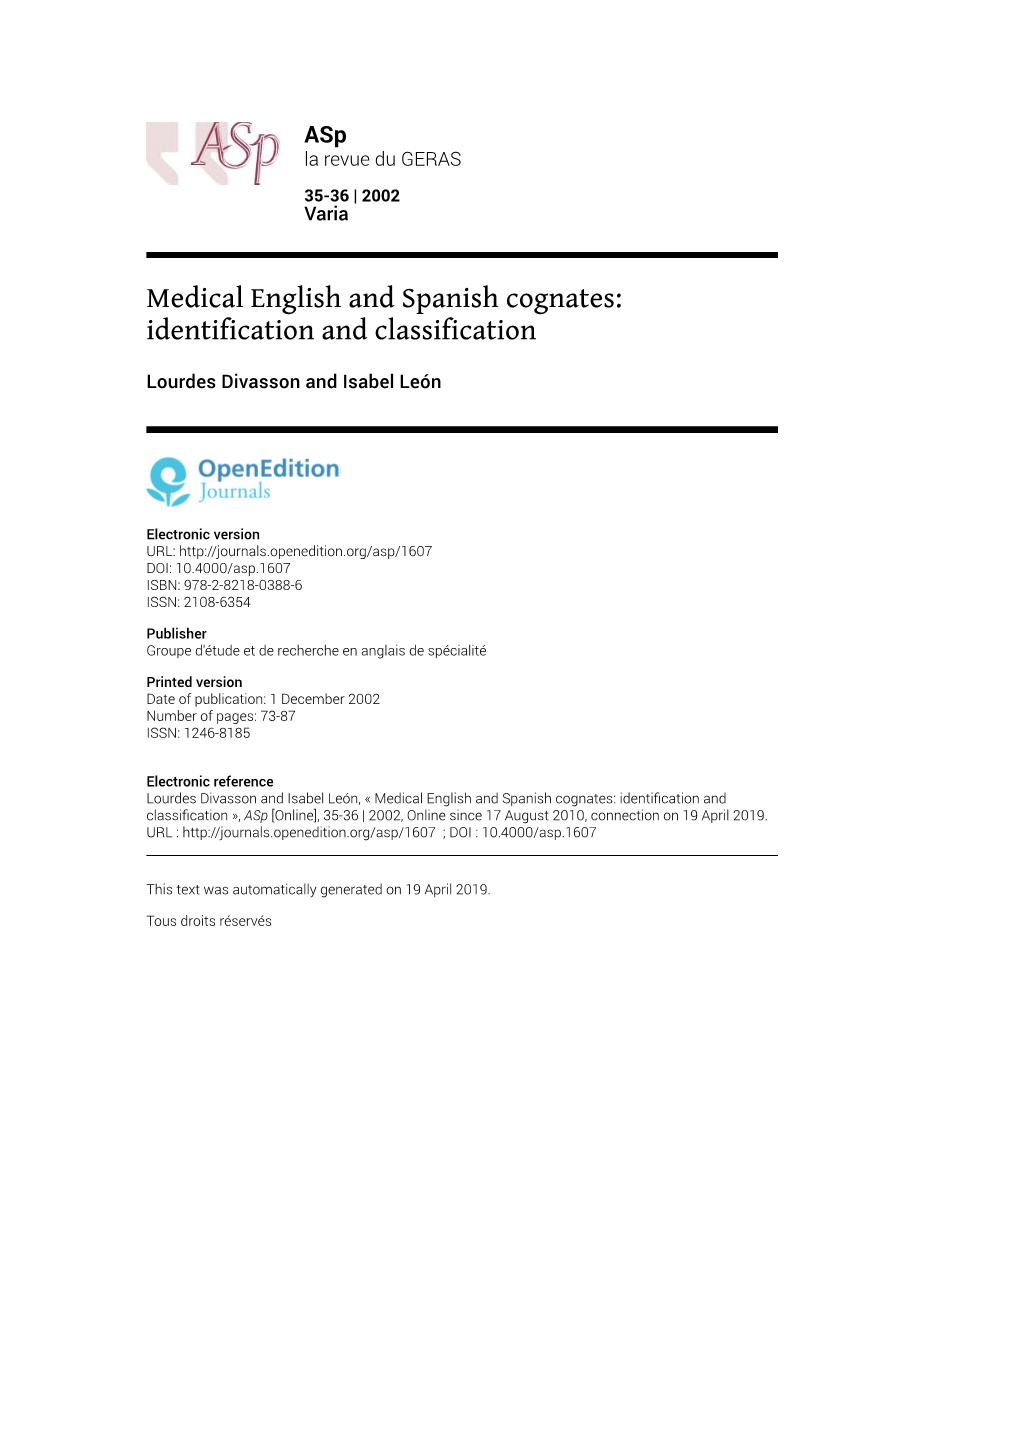 Medical English and Spanish Cognates: Identification and Classification